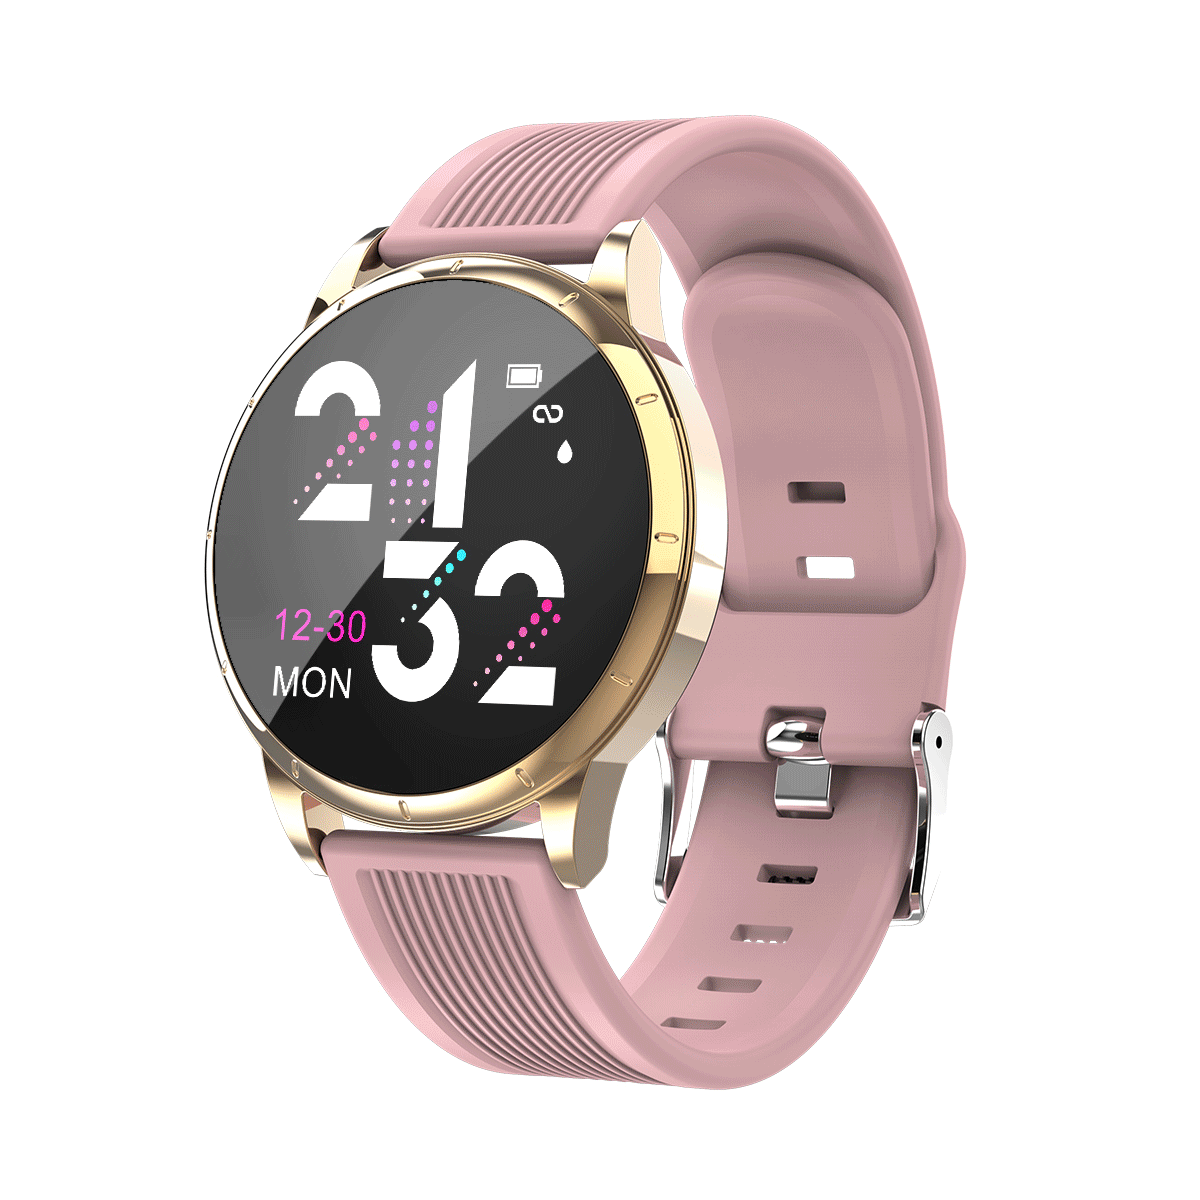 

Bakeey MK07 2.5D HD Color Screen Wristband Heart Rate and Blood Pressure Monitor Visible Message Show Smart Watch